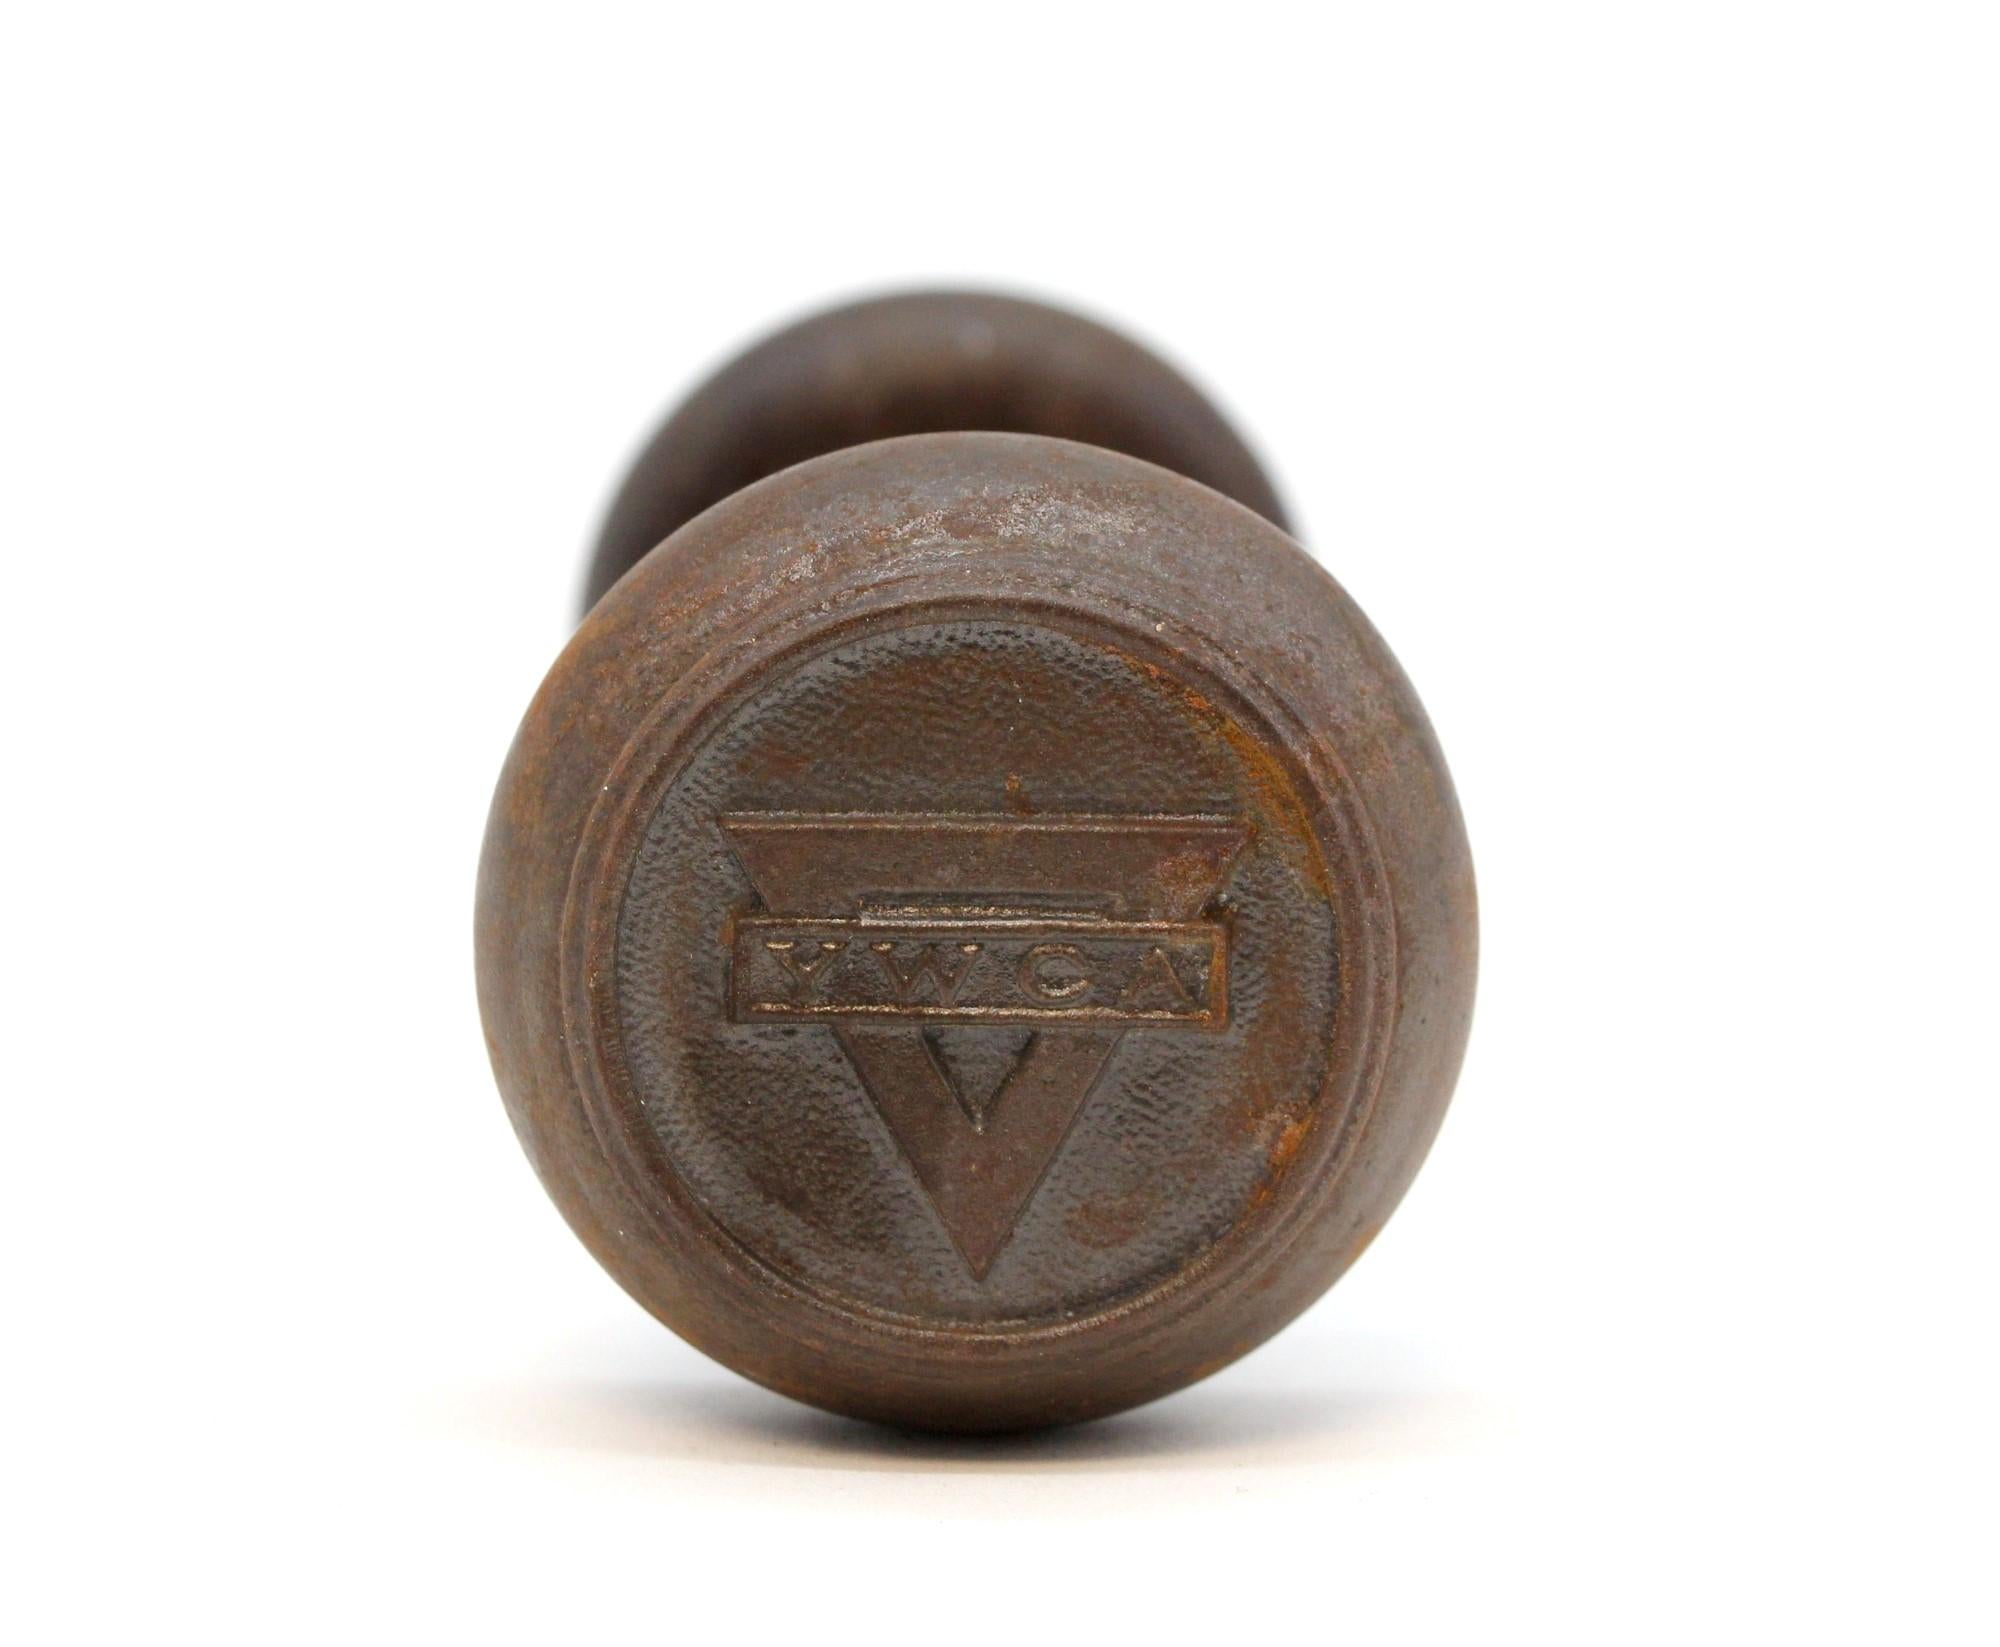 Emblematic cast iron door knob set with the initials YMCA on both ends. Among collectors this is known as being part of the P-80460 YWCA group. Set includes two knobs with a 